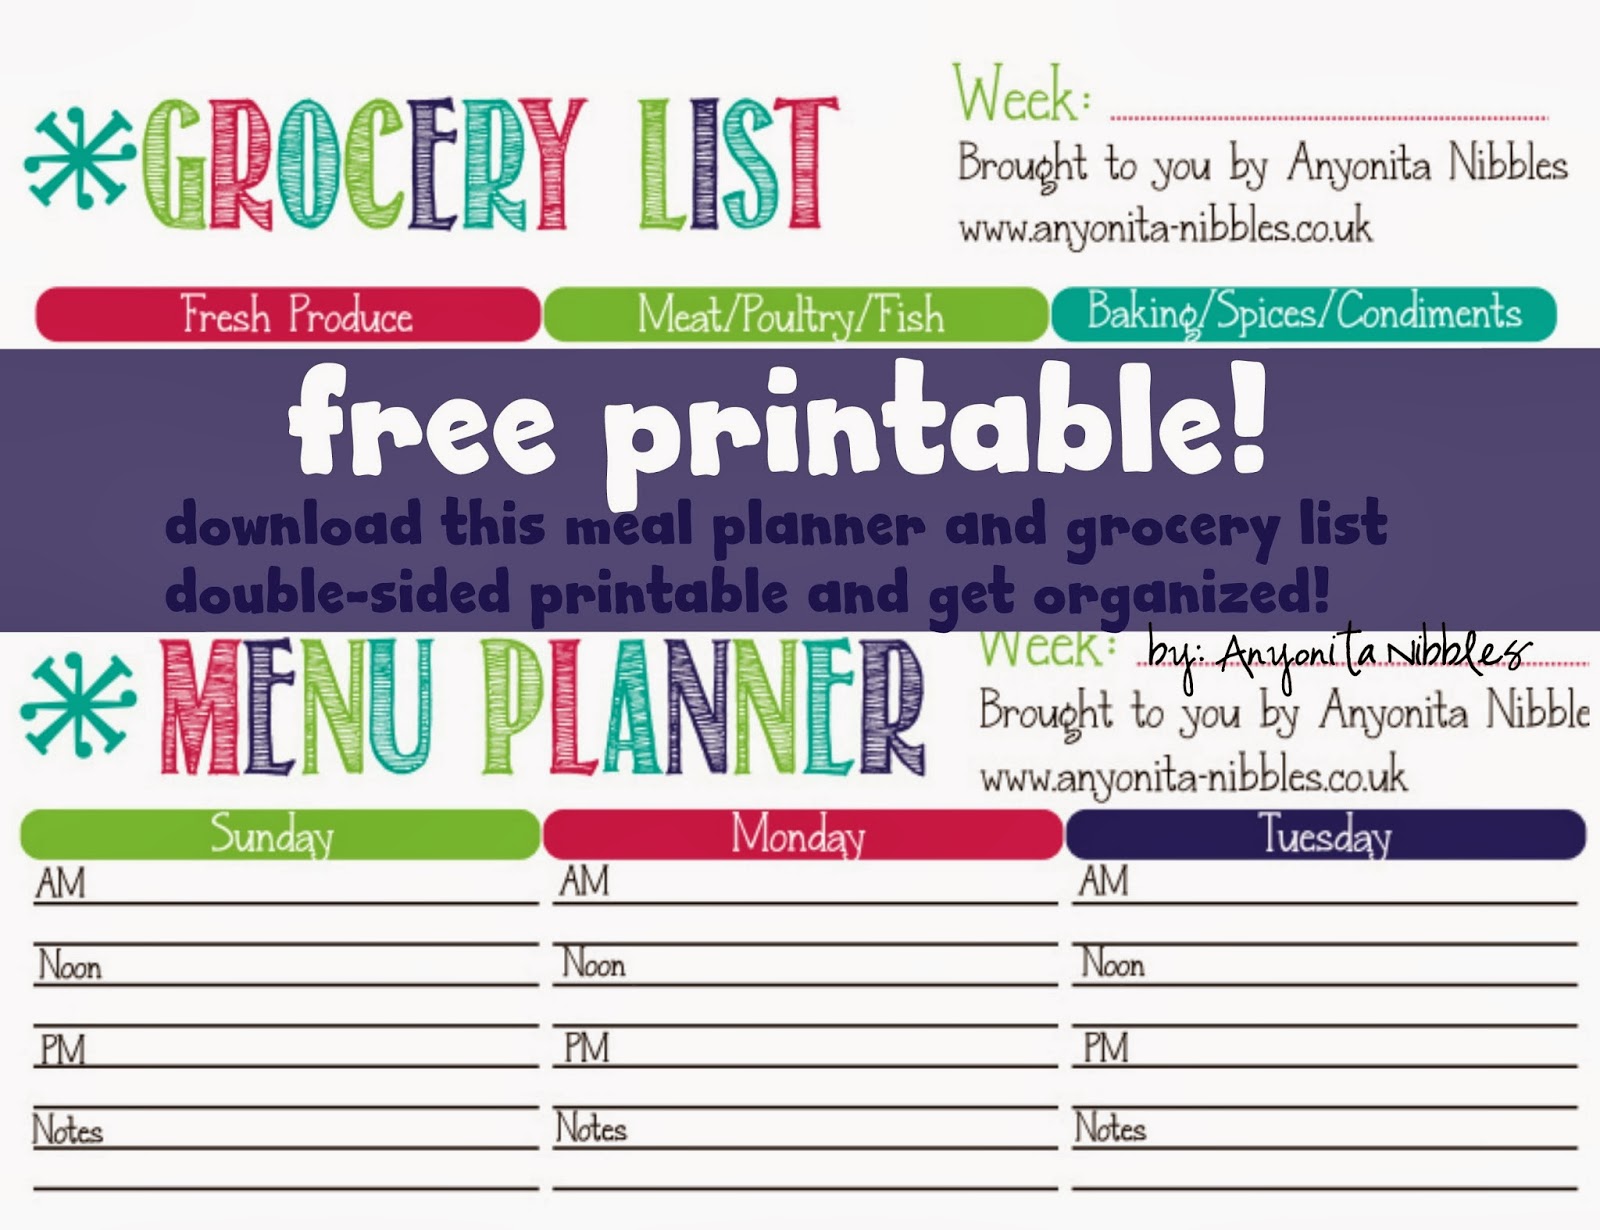 http://www.anyonita-nibbles.co.uk/2014/02/free-grocery-list-meal-planner-printable.html